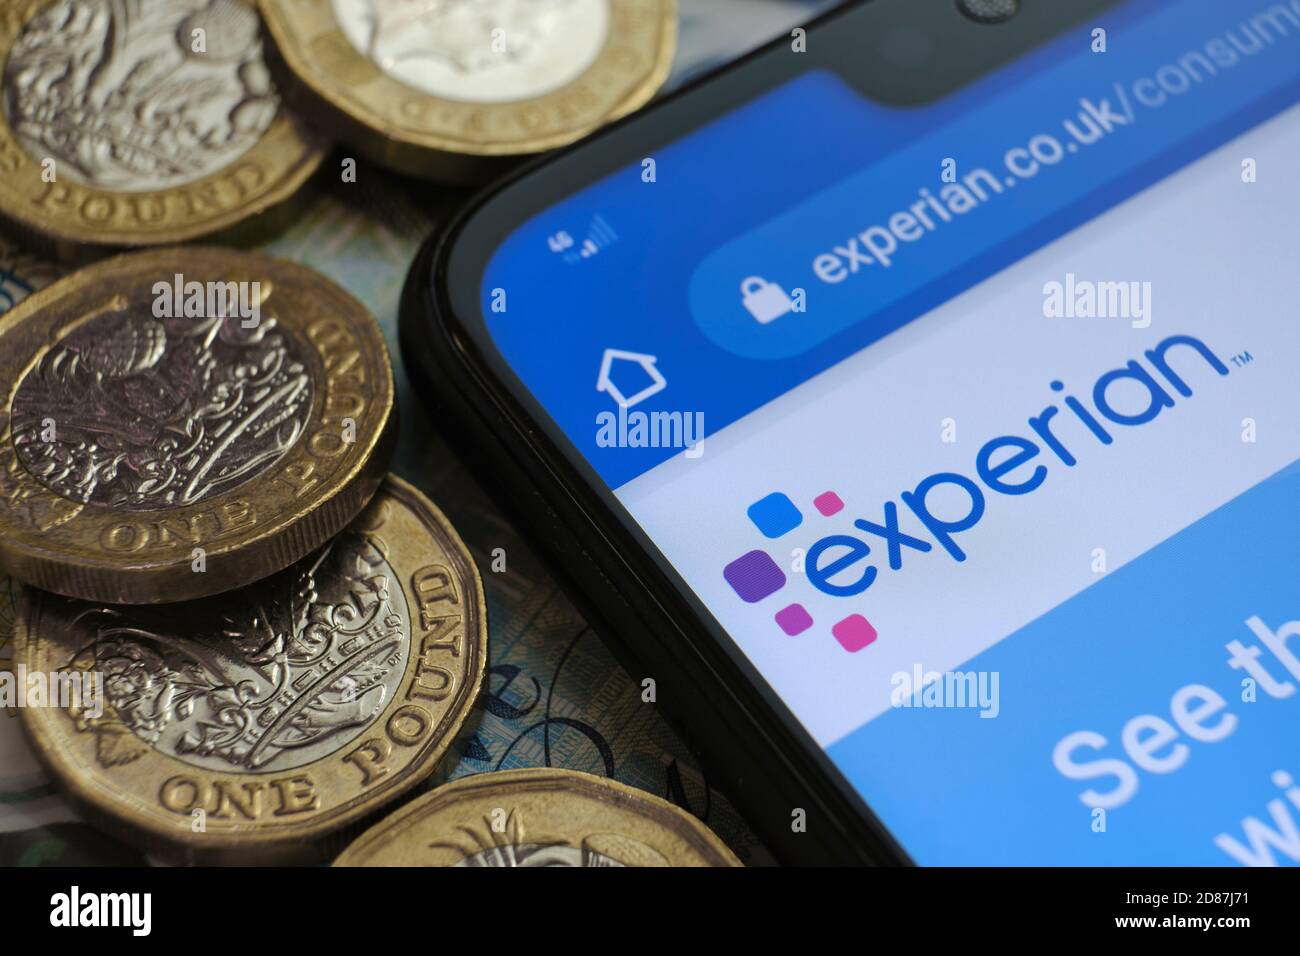 Experian Credit Check agency logo seen on the web page on the corner of the smartphone placed near to pound coins. Selective focus. Stock Photo